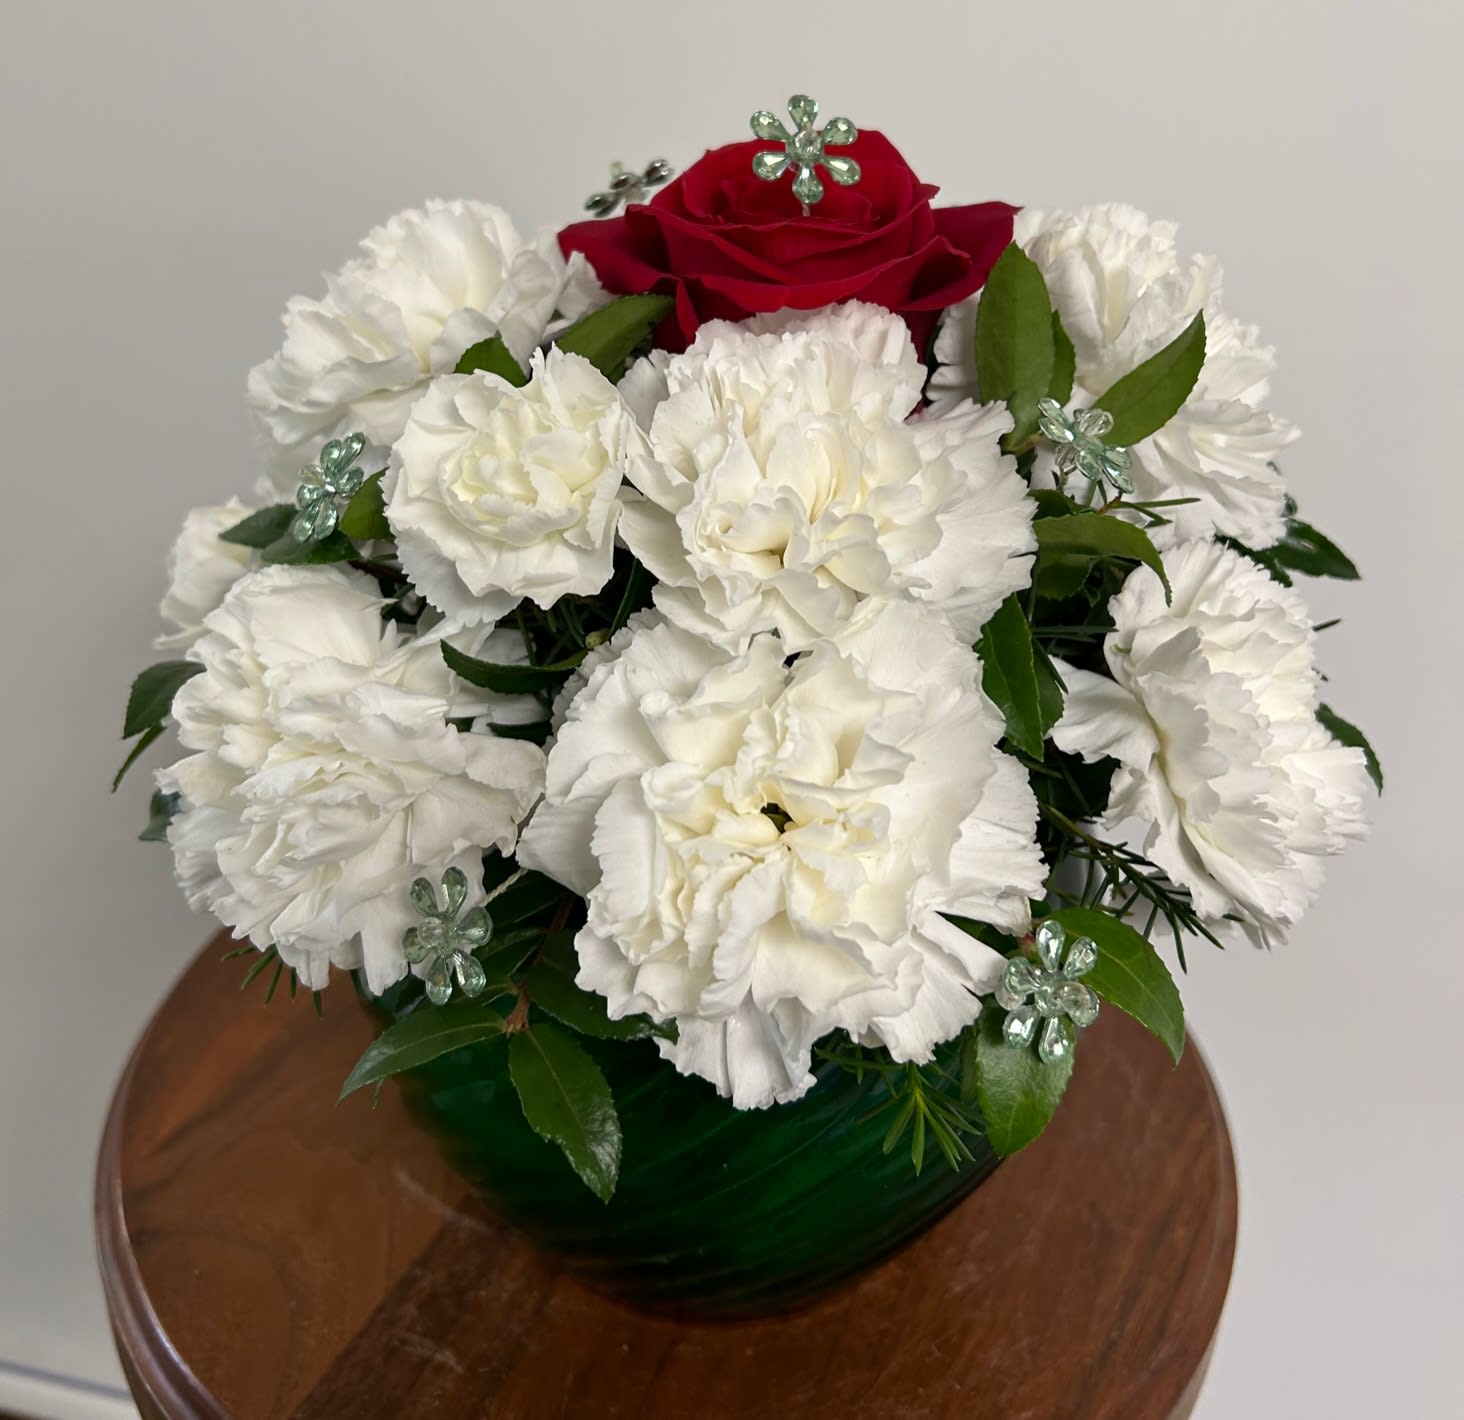 Dazzling Dream - A fun arrangement with a little sparkle!  A red rose surrounded by white carnations and daisy sparkle inserts.